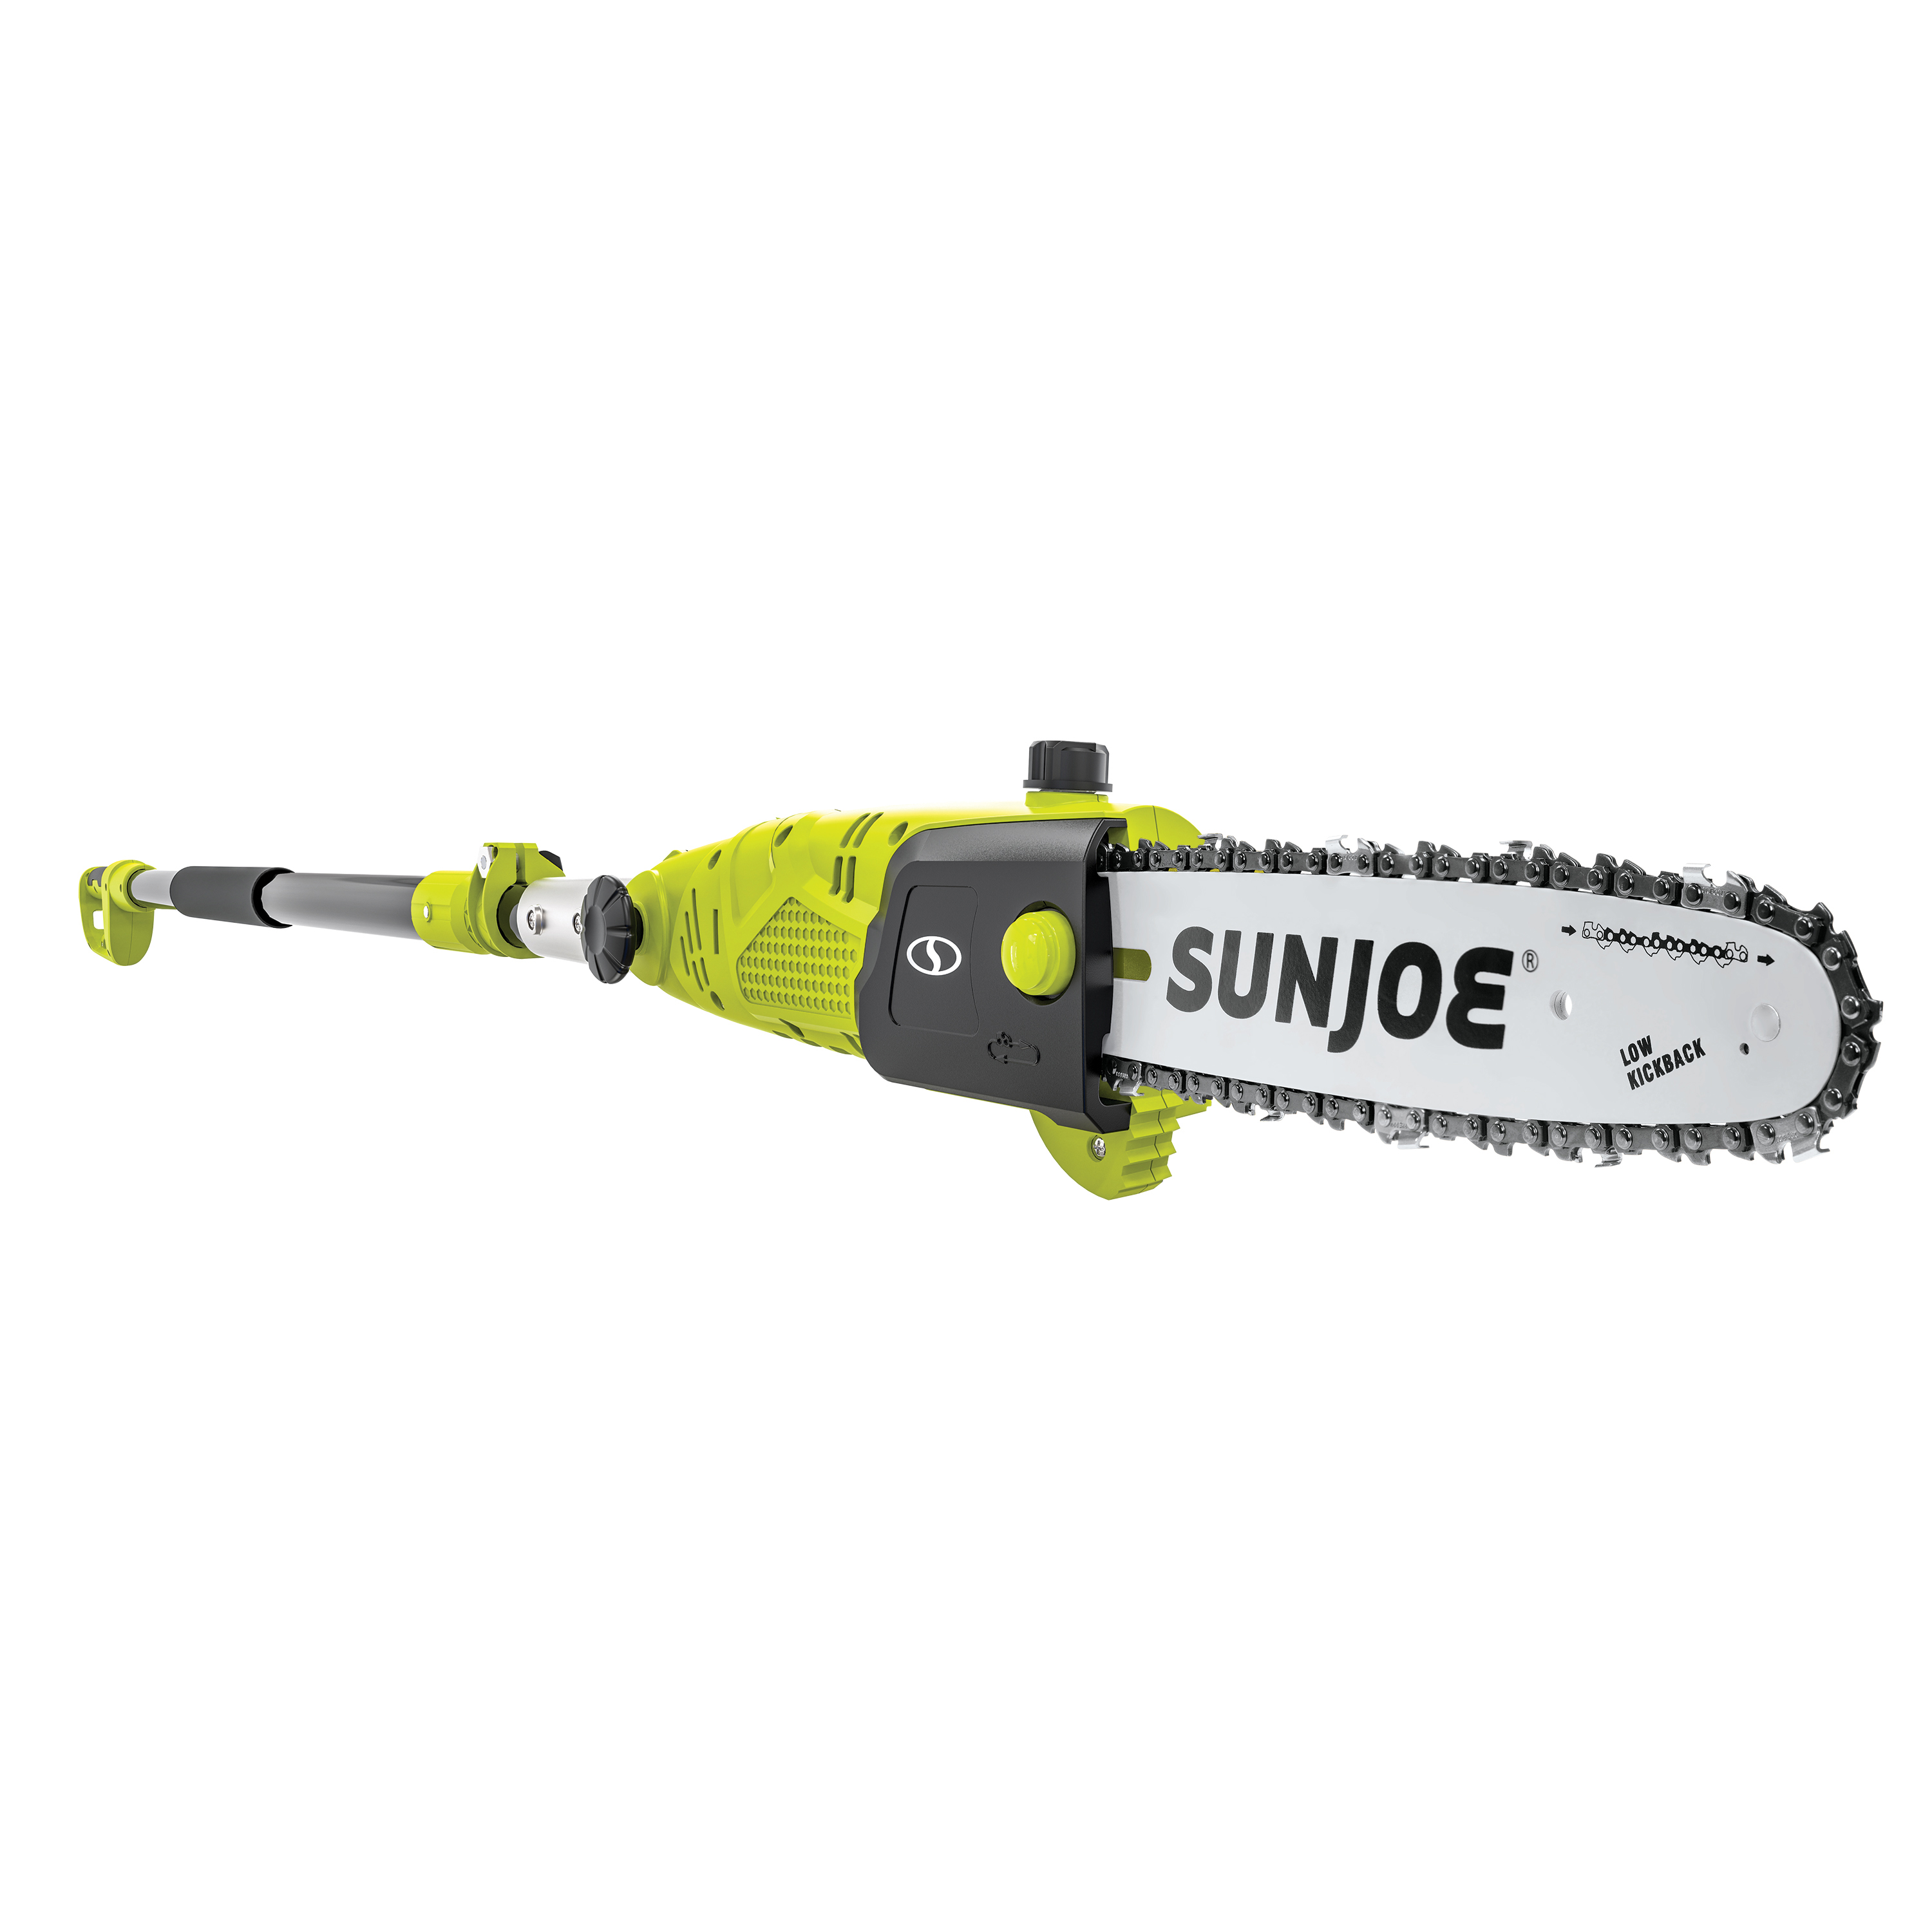 10 in 8.0 Amp Electric Multi-Angle Pole Chain Saw, Green